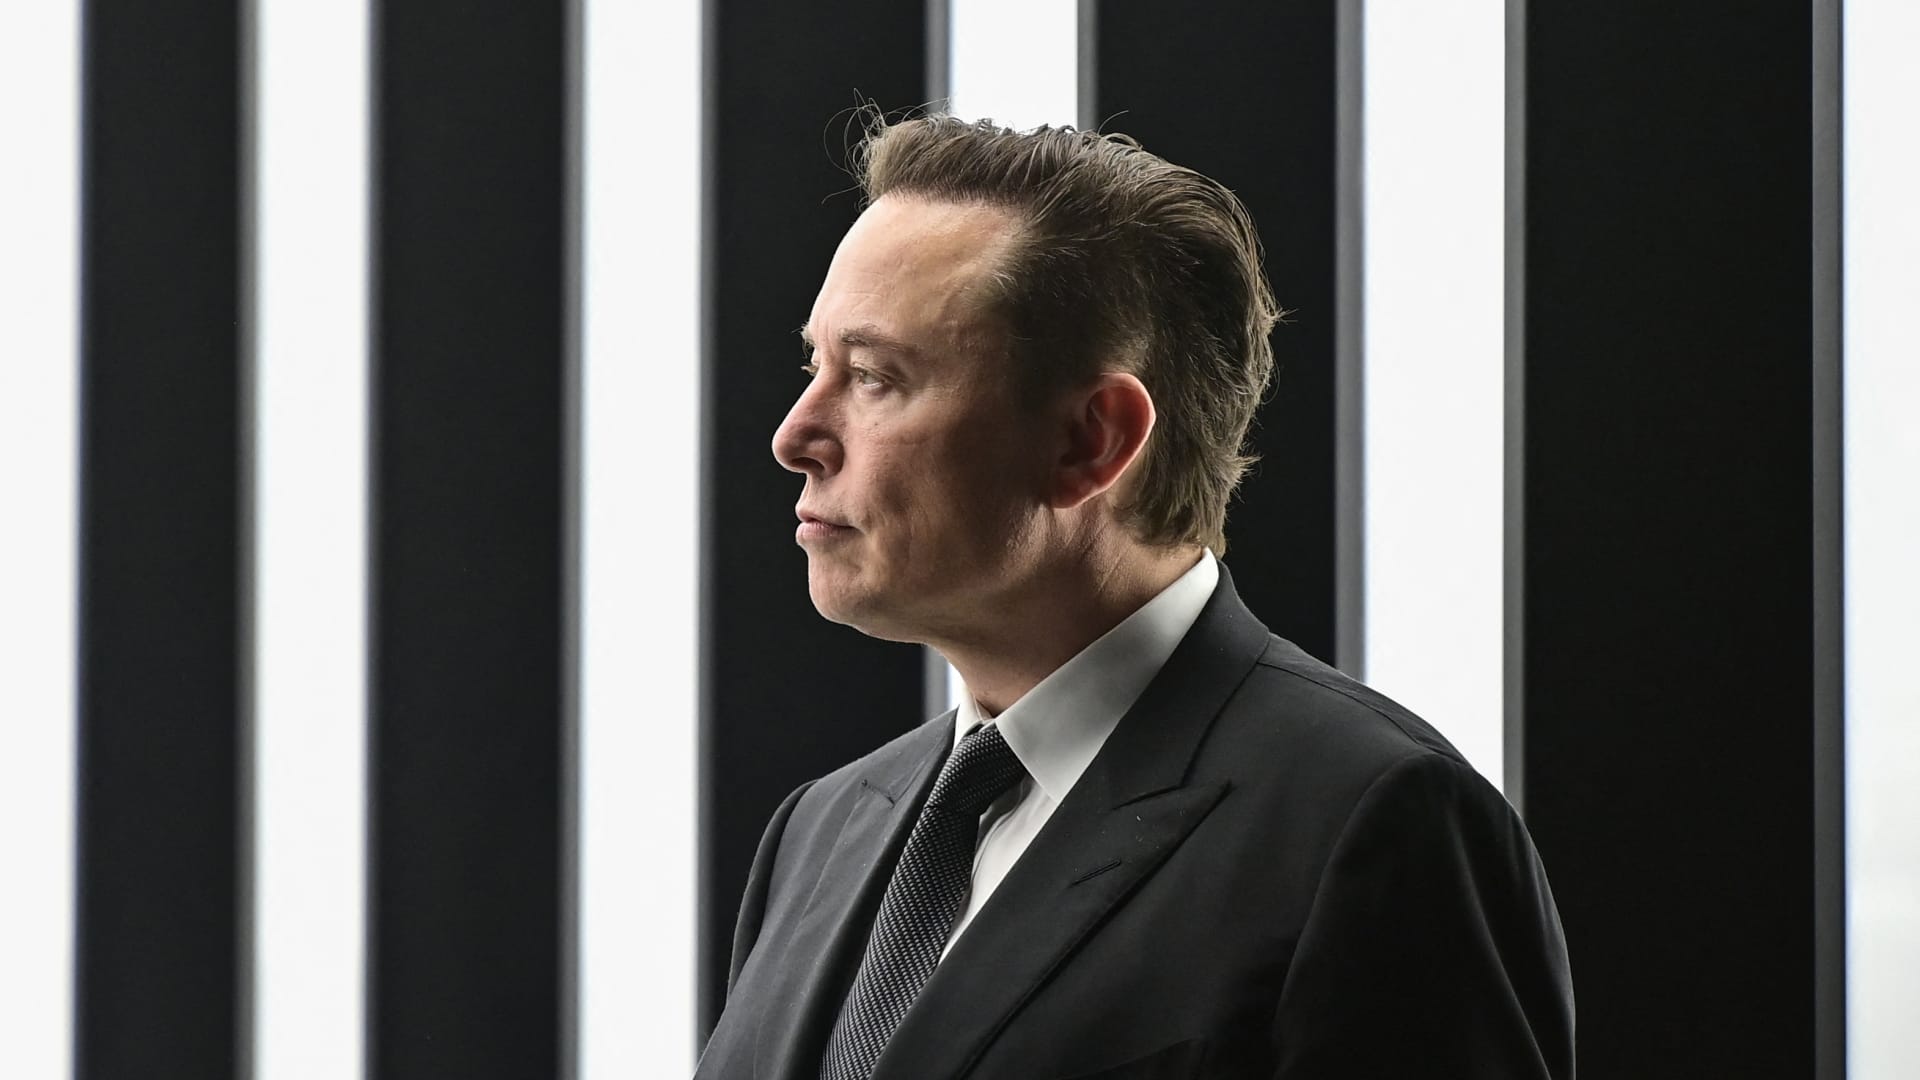 Musk to explore potential tender offer for Twitter, has $46.5B in committed financing for deal